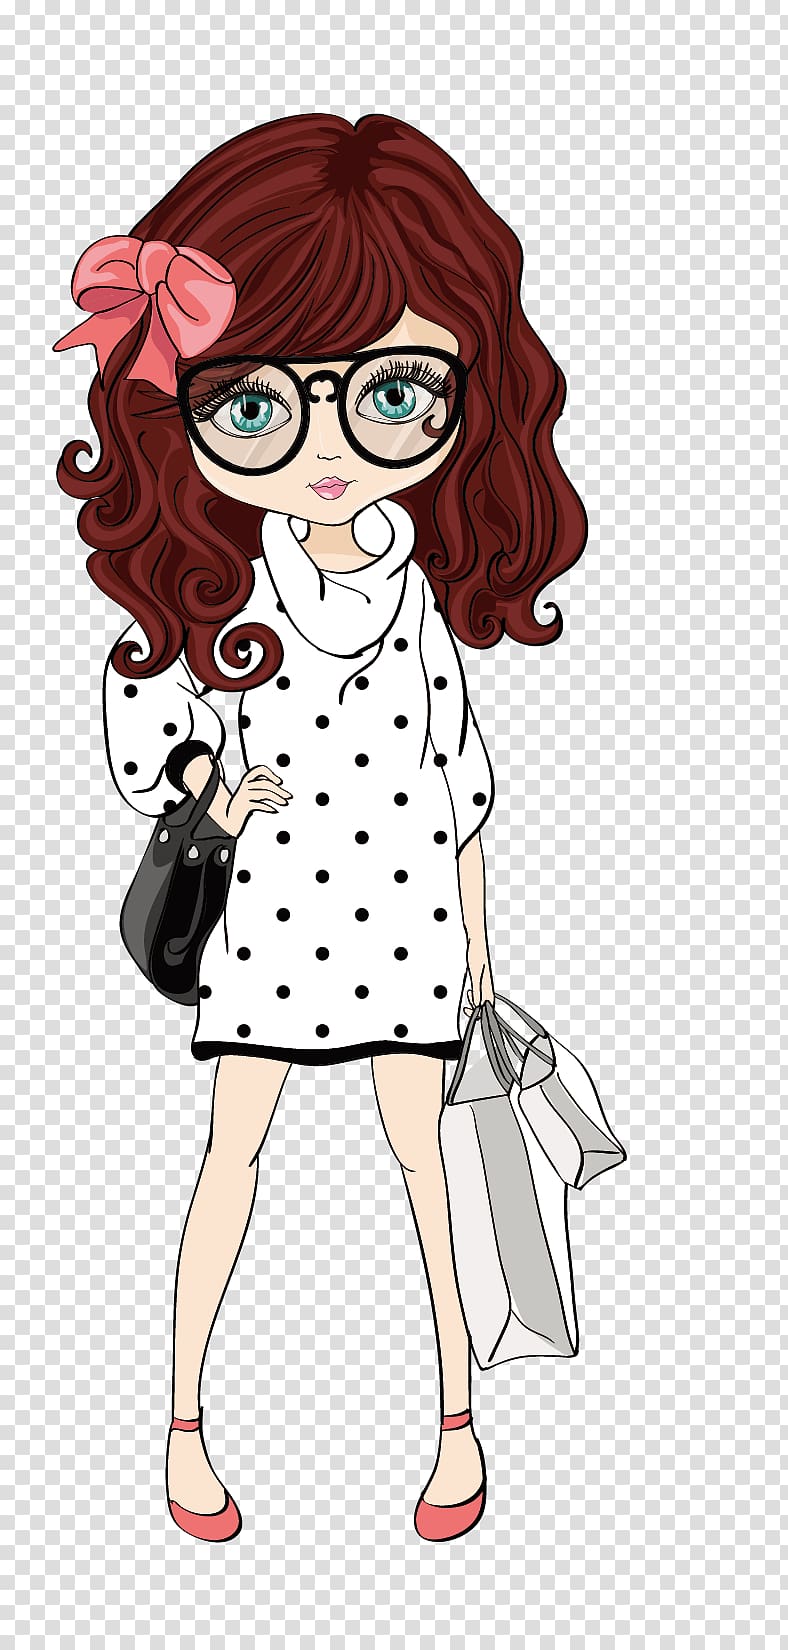 Woman with white dress holding bags and wearing eyeglasses.